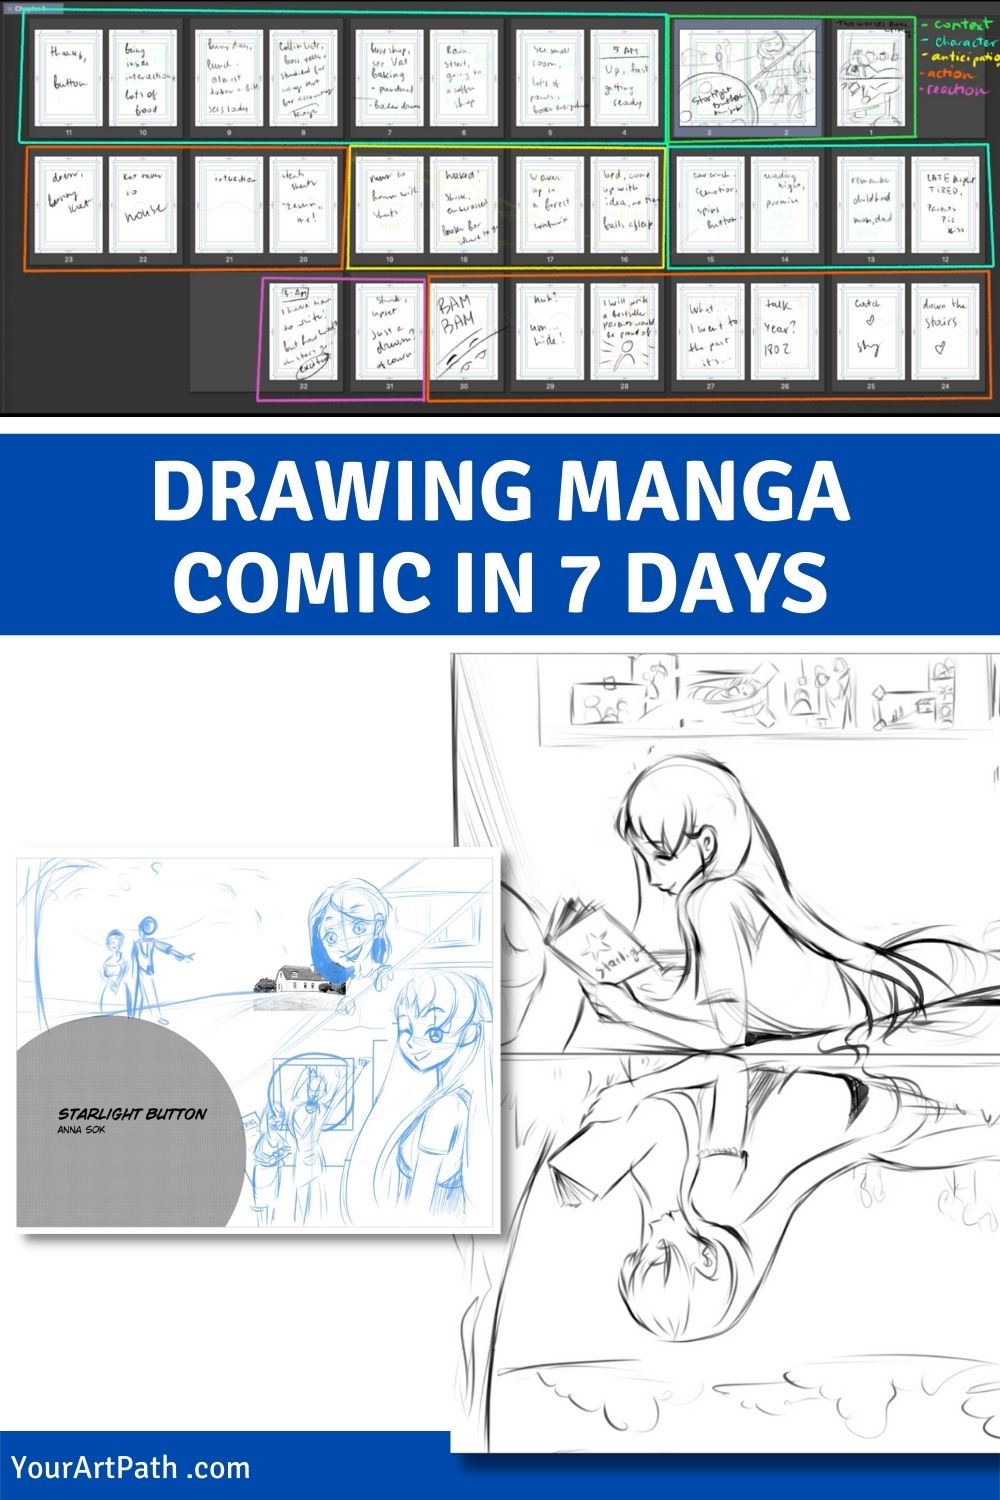 learn to draw manga comics. Learn from Kenny Ruiz course on Domestika how to create your own manga, and follow my 7 day manga challenge to see if I could.